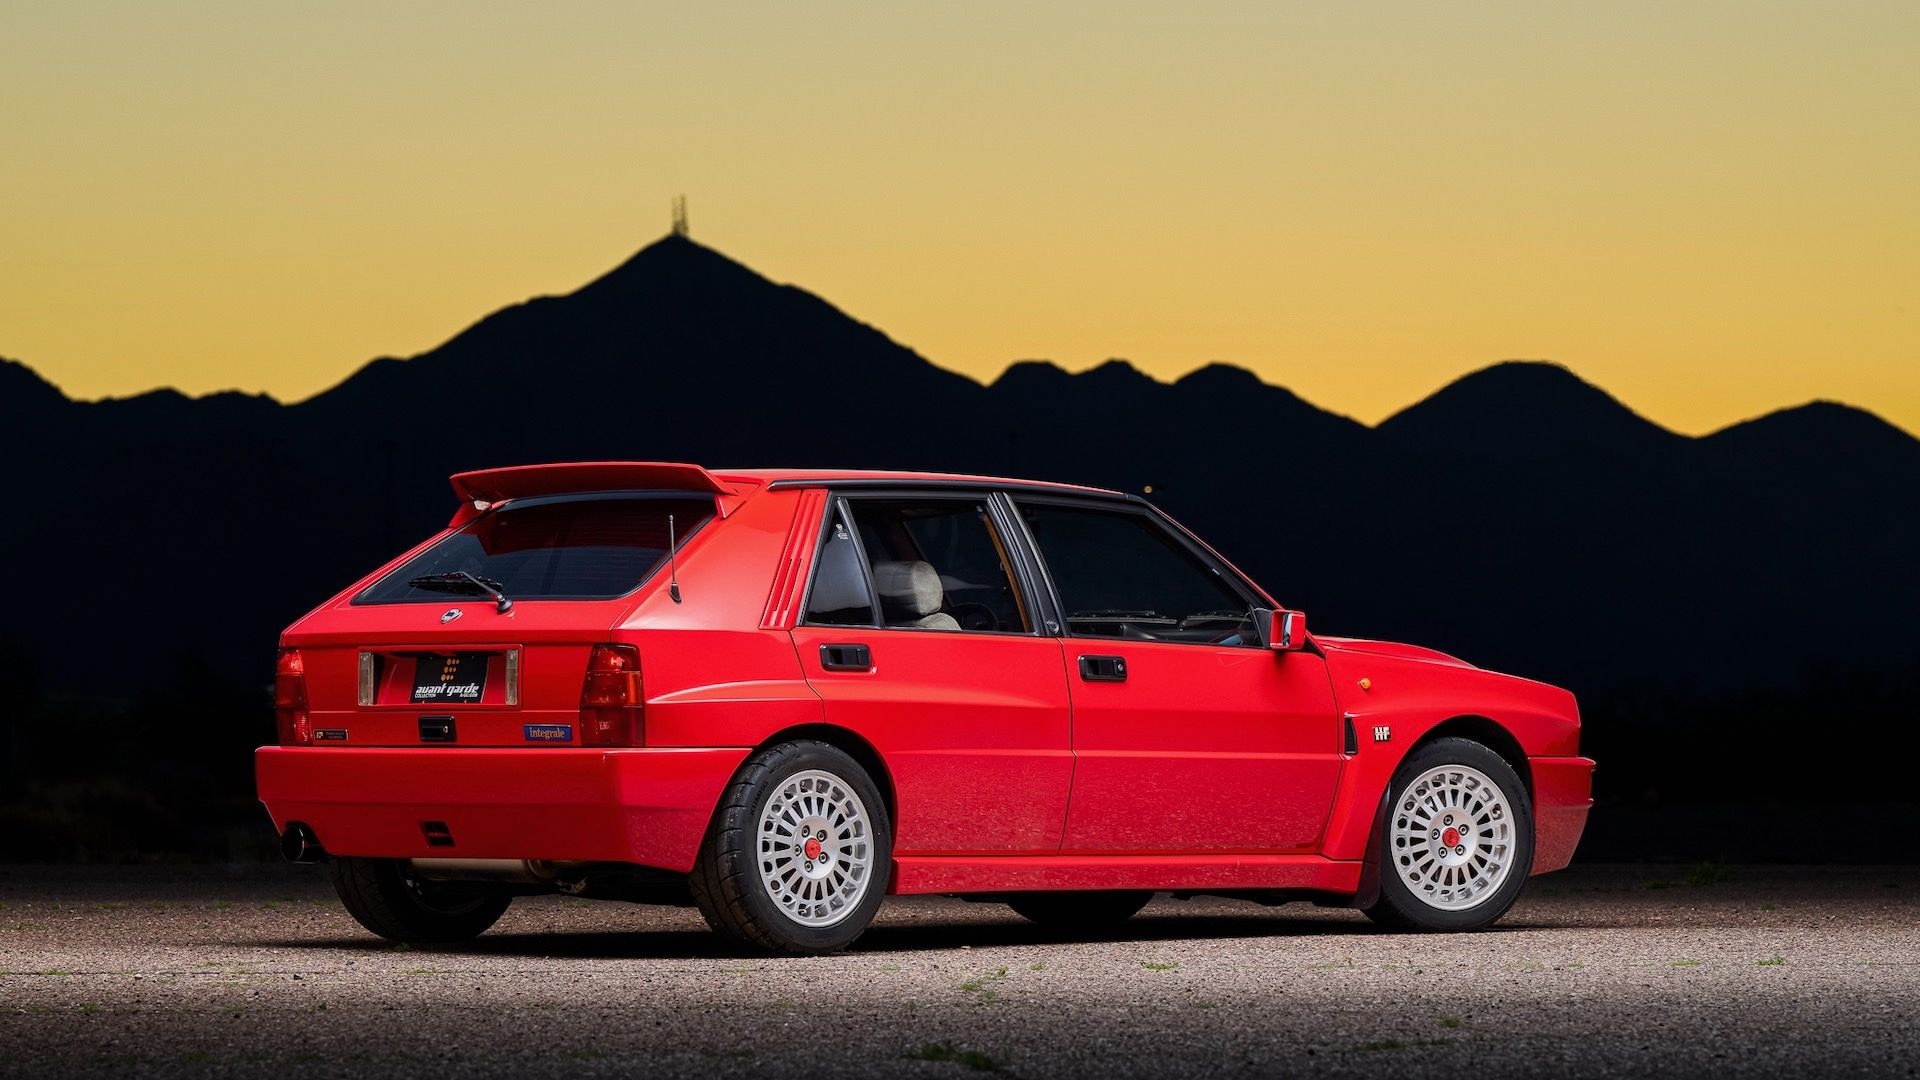 1992 Lancia Delta Integrale Evo 1 owned by Ralph Gilles (photo via Bring a Trailer)